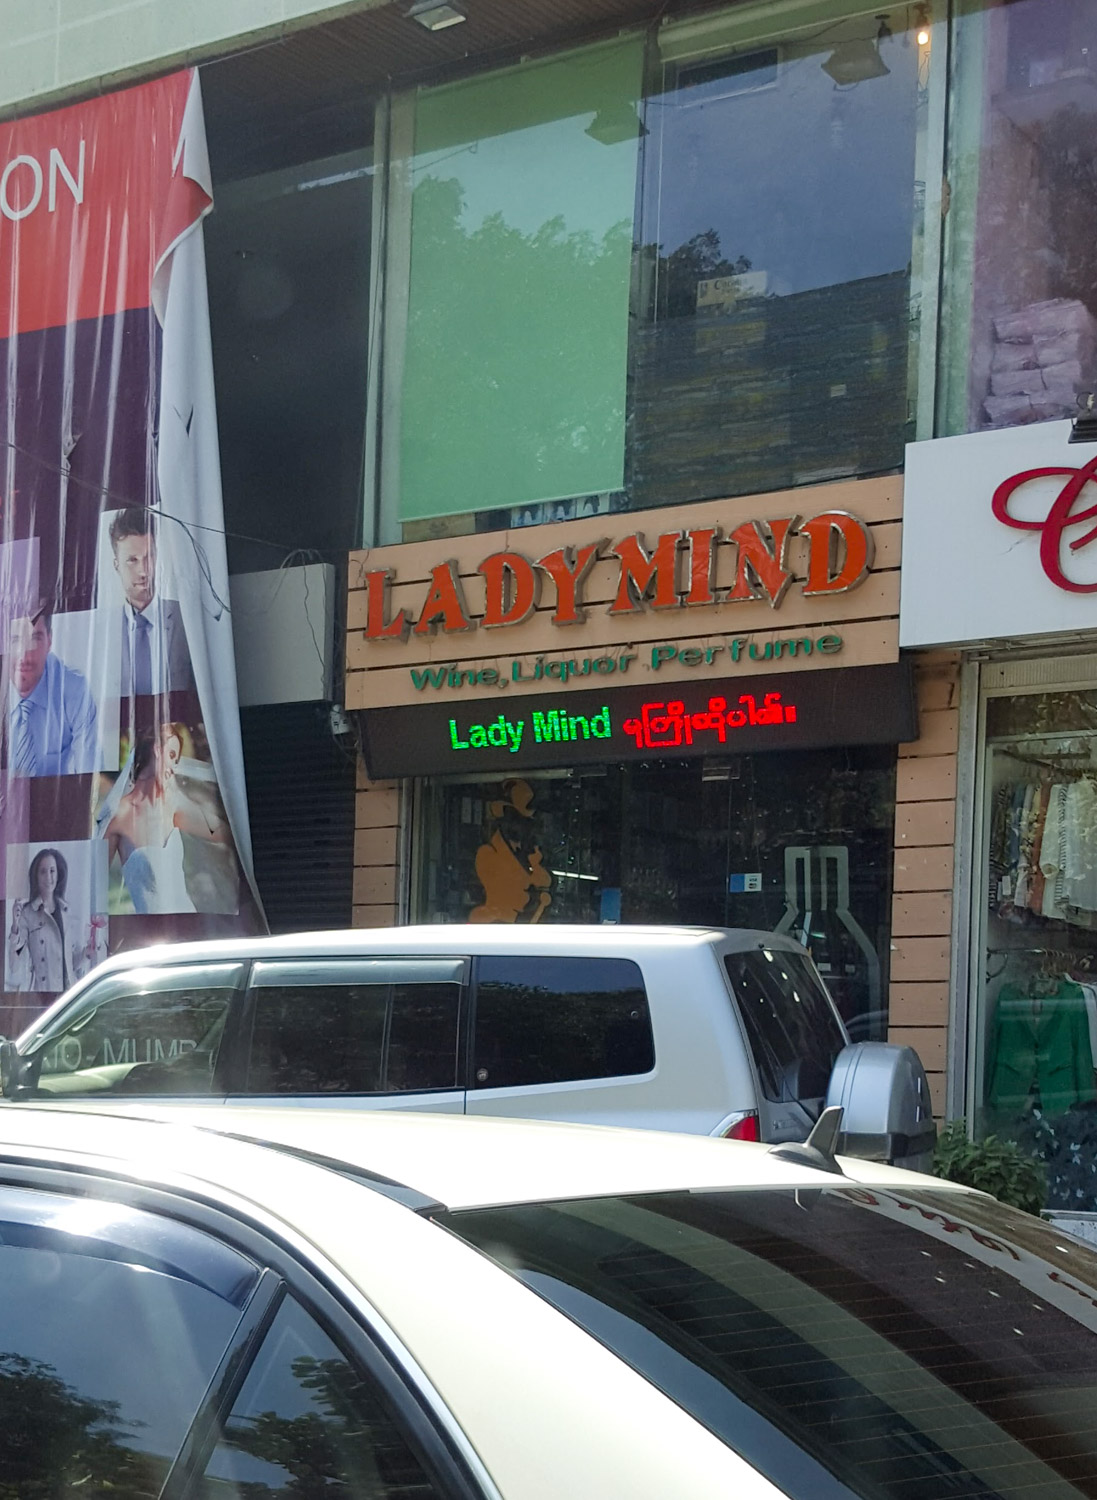 Lady Mind. For all your wine, liquor and perfume needs.